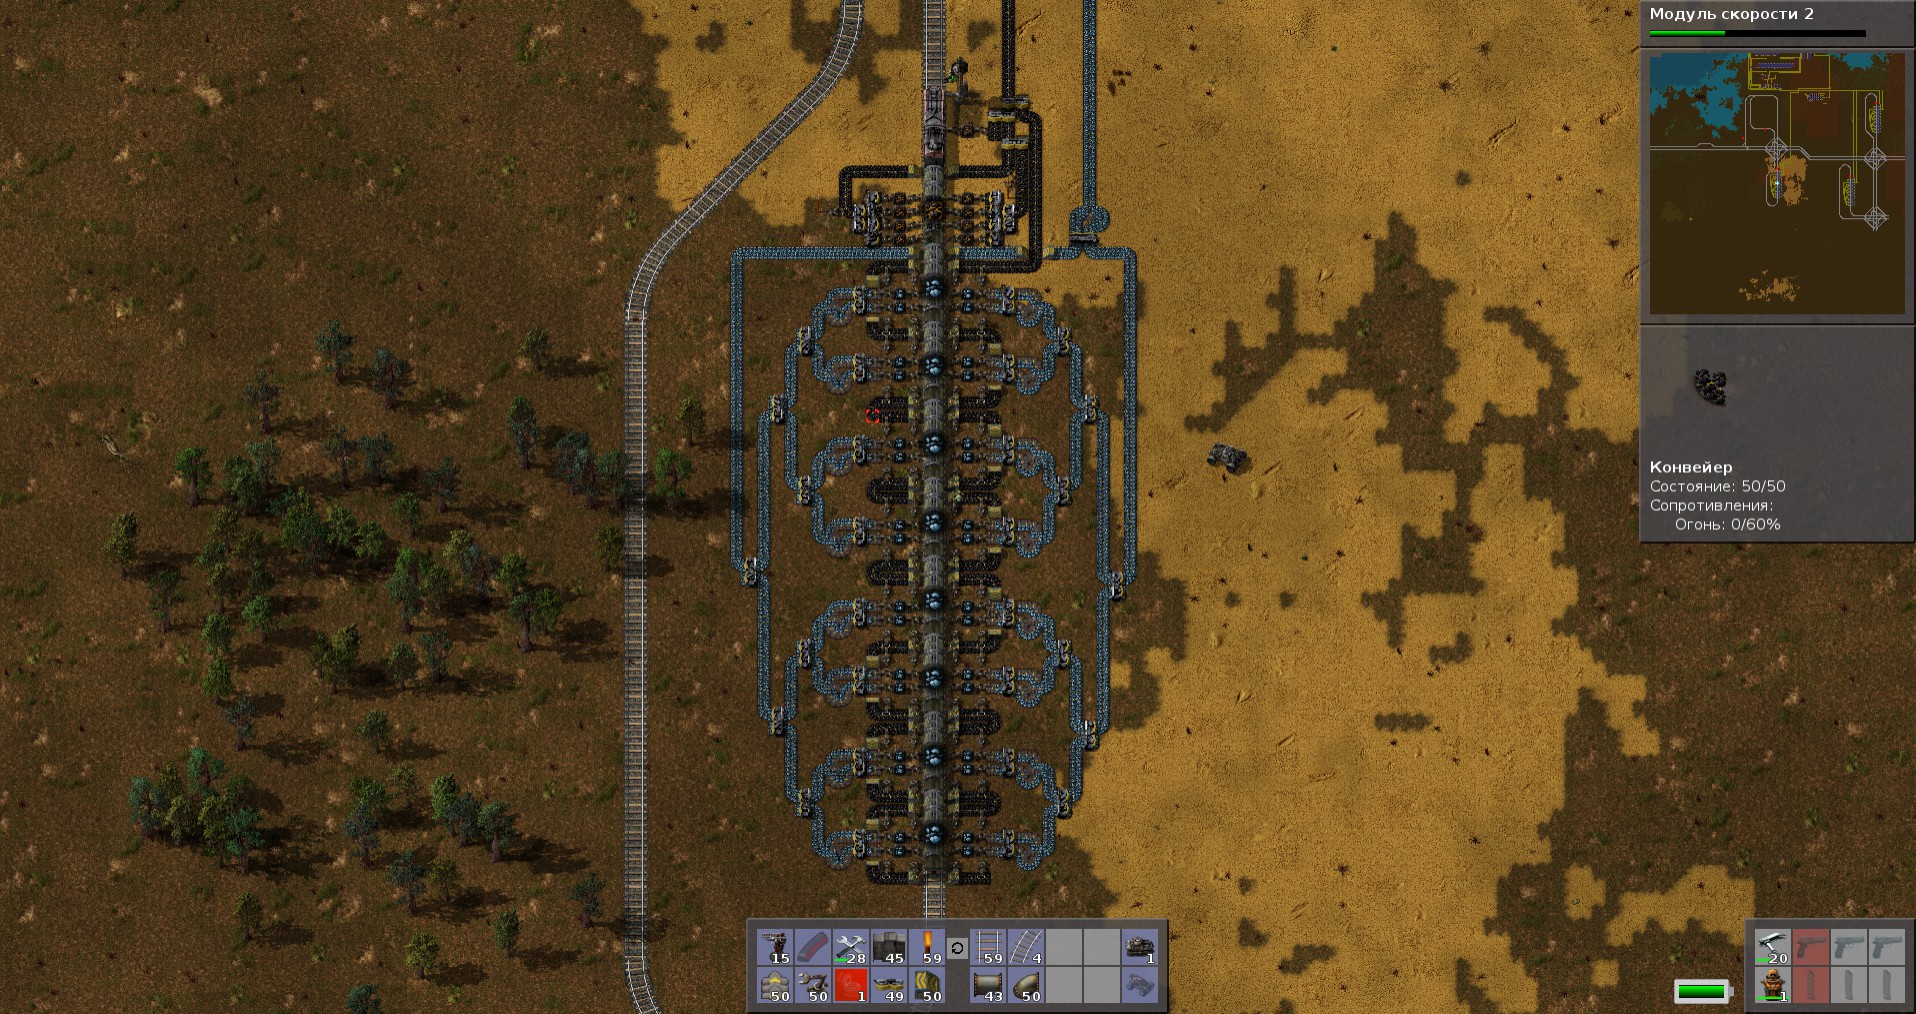 Now unloading train station look a bit more complicated...